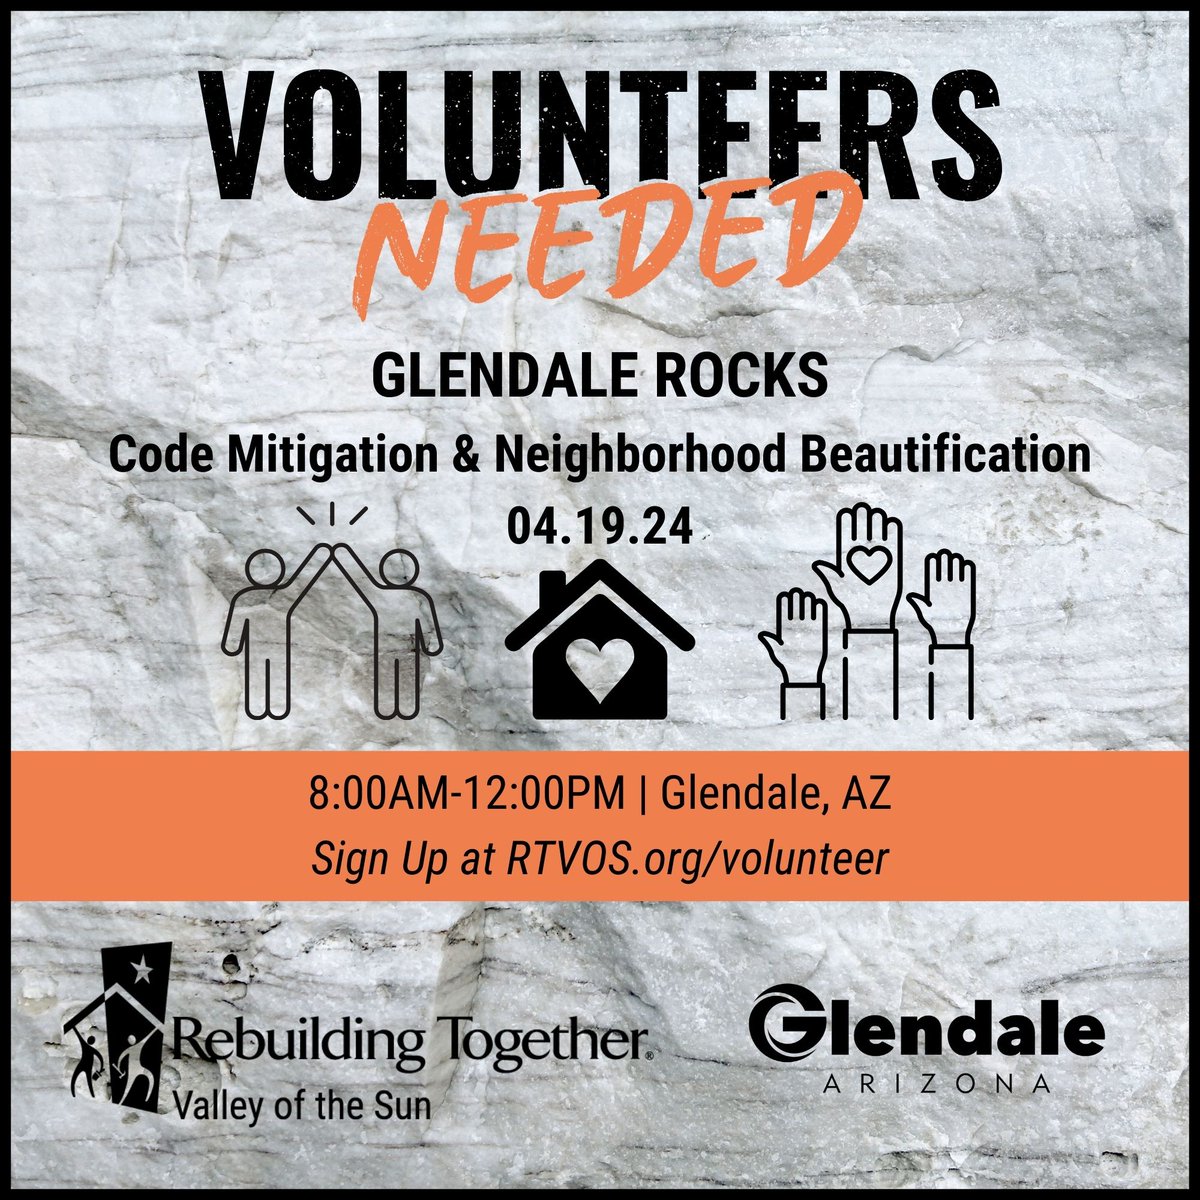 Community Engagement is recruiting volunteers to help with a neighborhood beautification project with @RTVOS. Volunteer tasks may include painting address numbers on curbs, moving rock into yards, weeding, and general landscaping. Sign up at RTVOS.org/volunteer